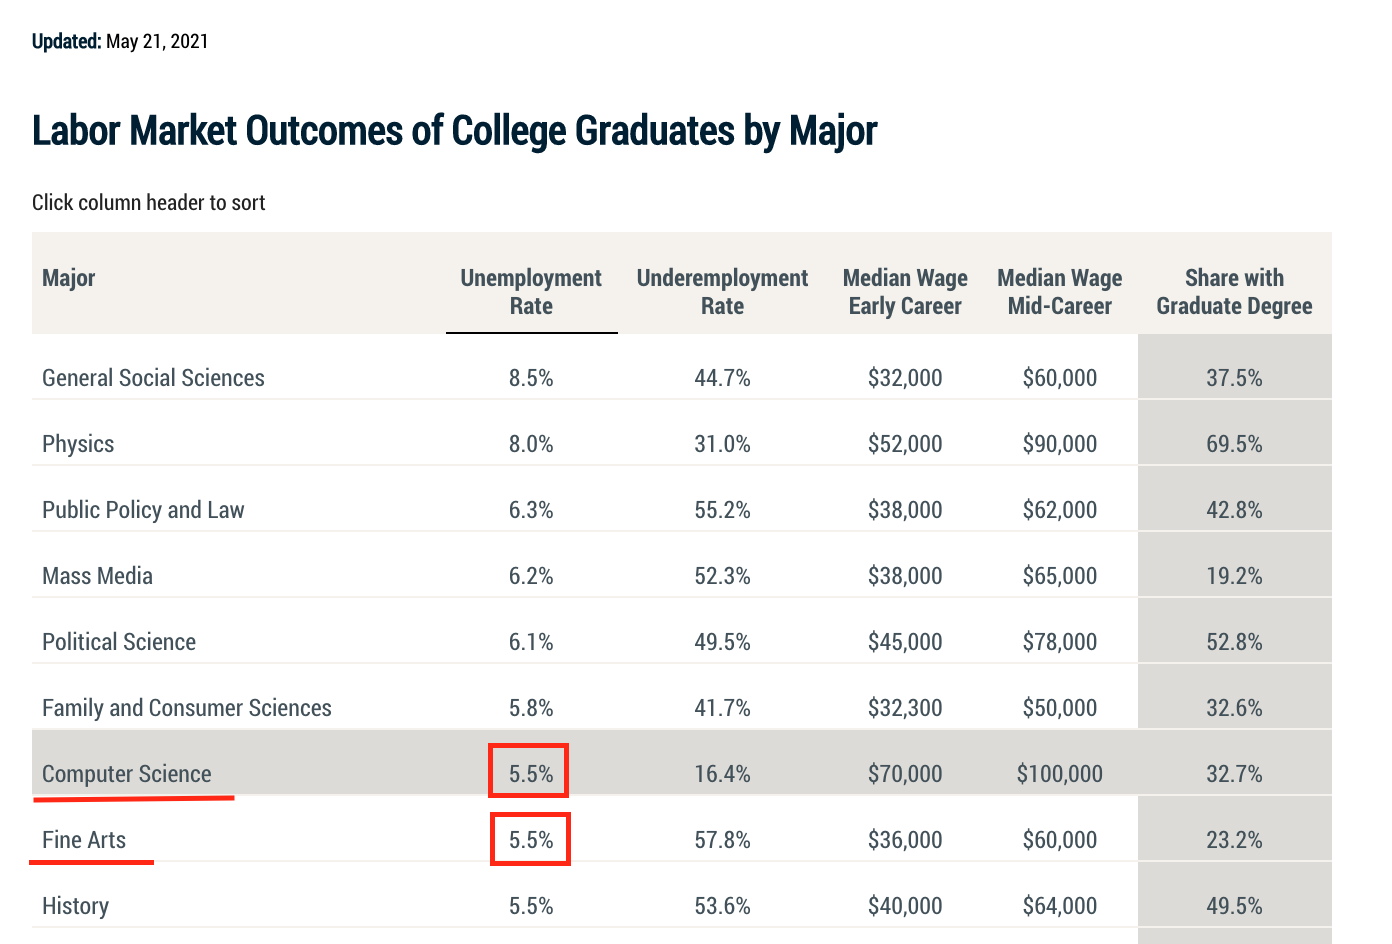 Chart of Labor Market Outcomes of College Graduates by Major (May 21, 2021)